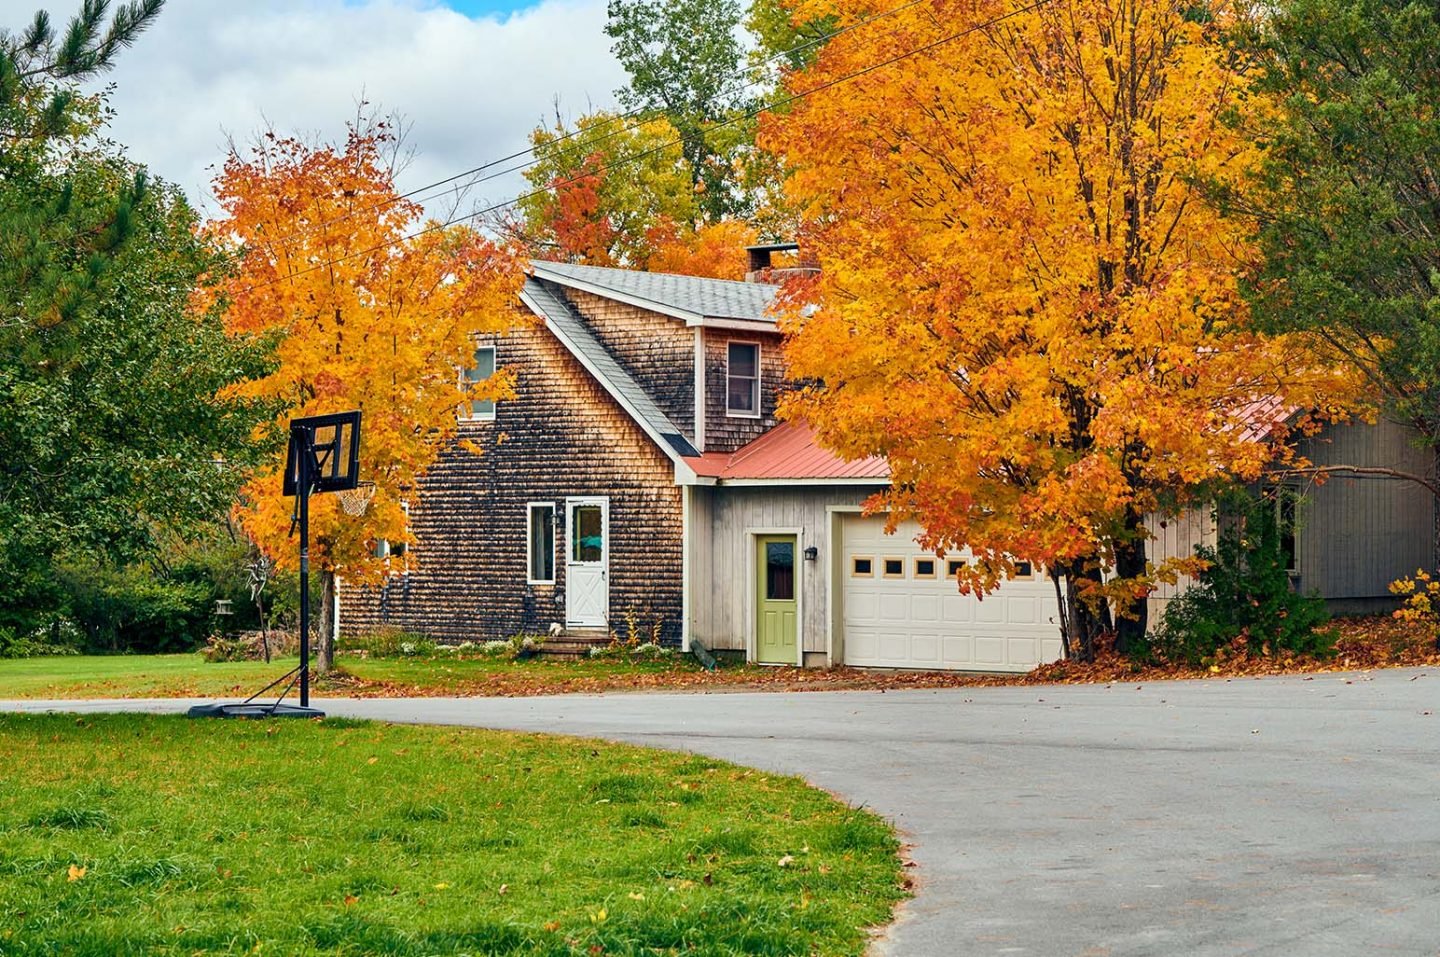 How to Get Your Home Ready for Fall